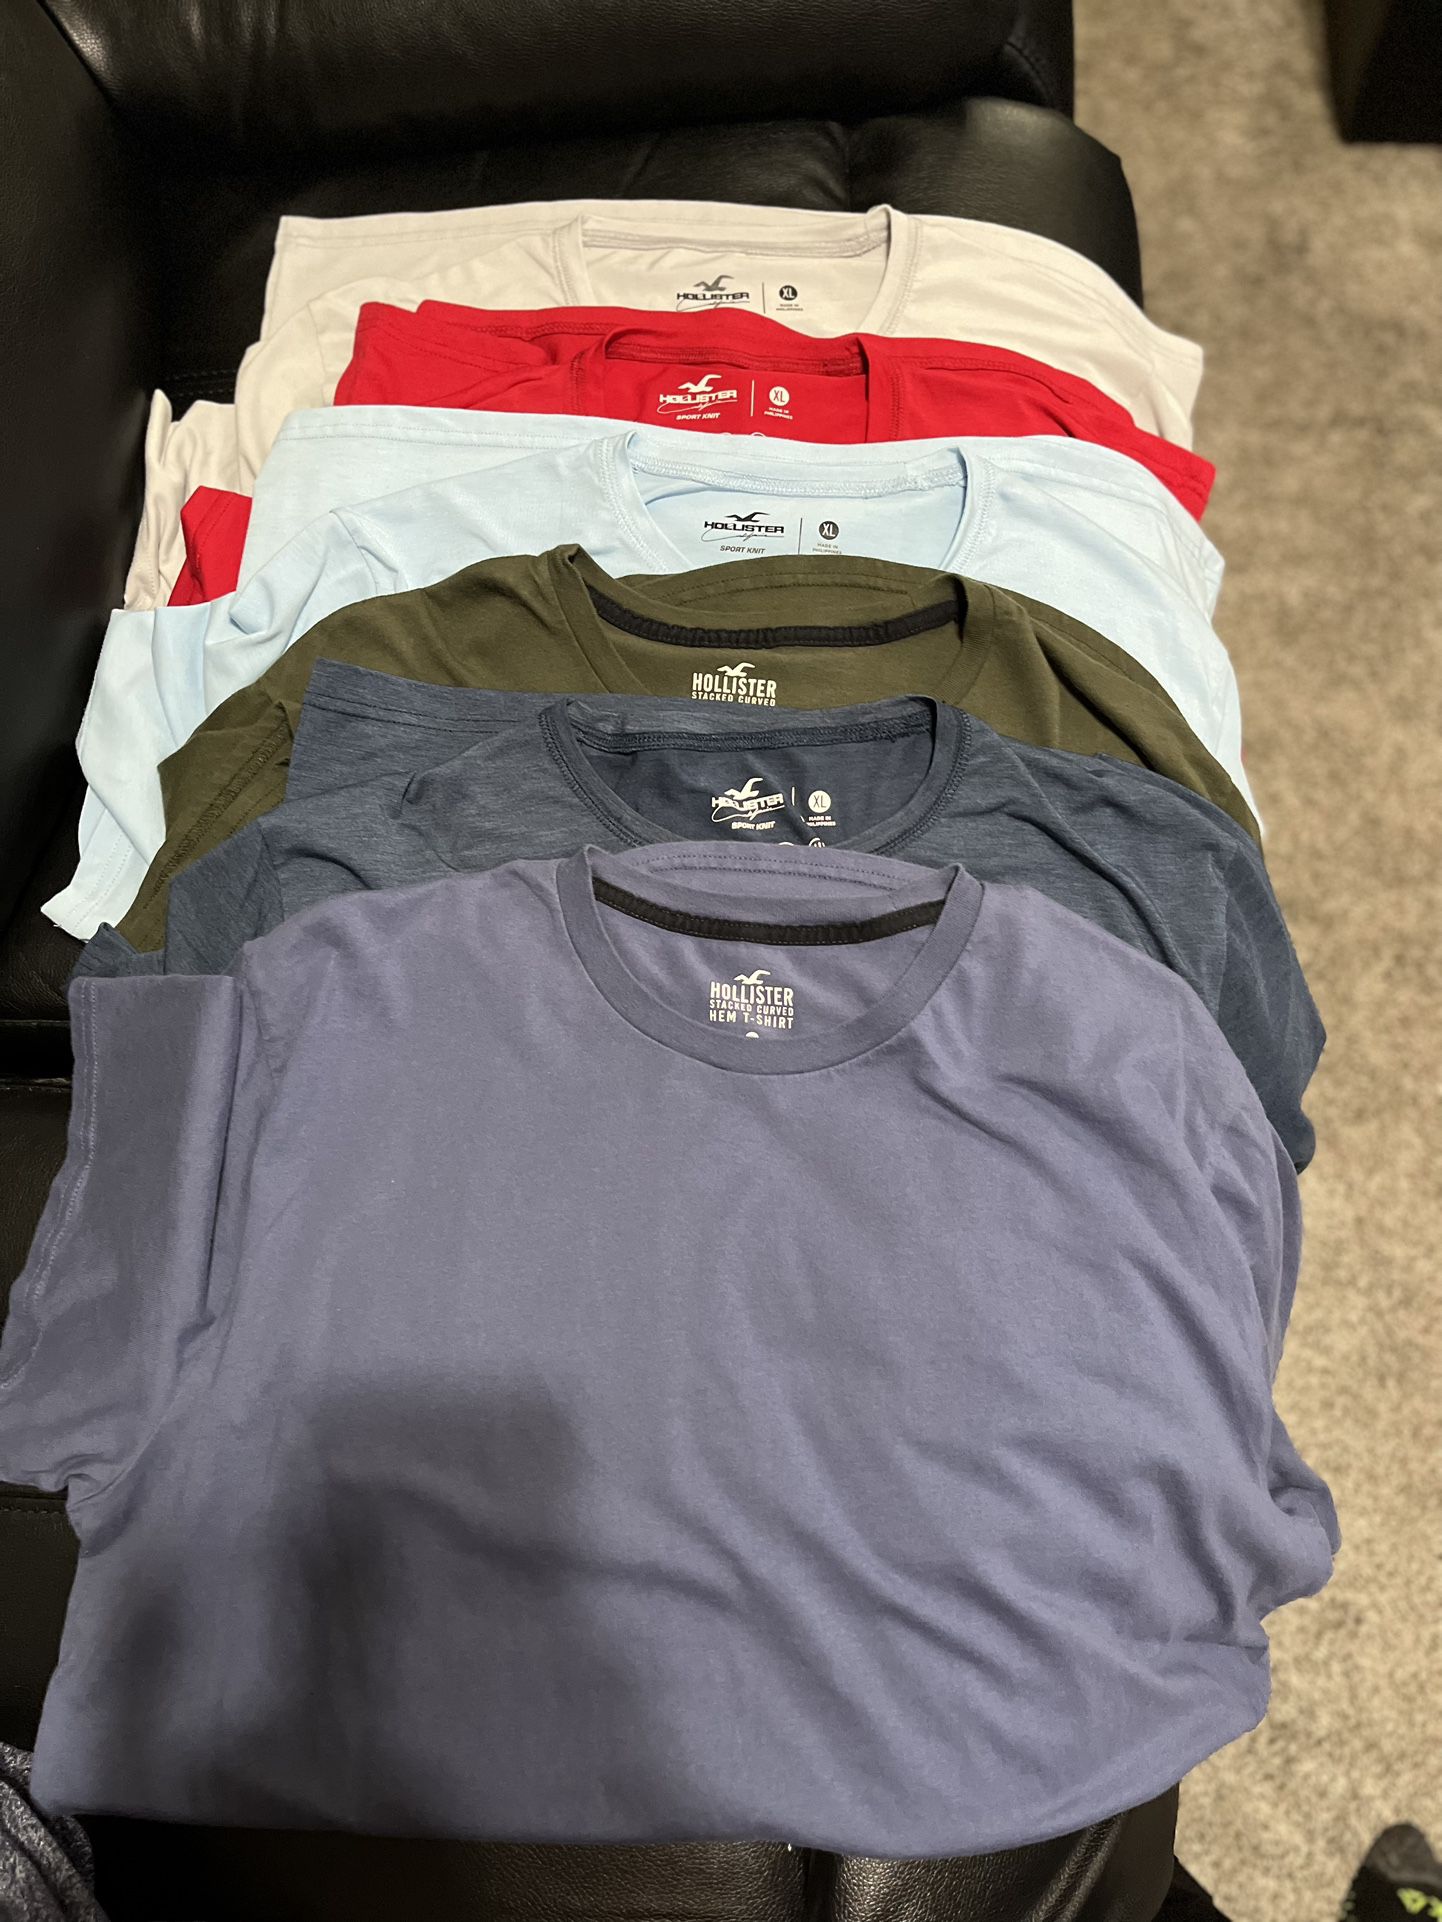 Hollister Sport knit Shirts XL for Sale in Palmdale, CA - OfferUp